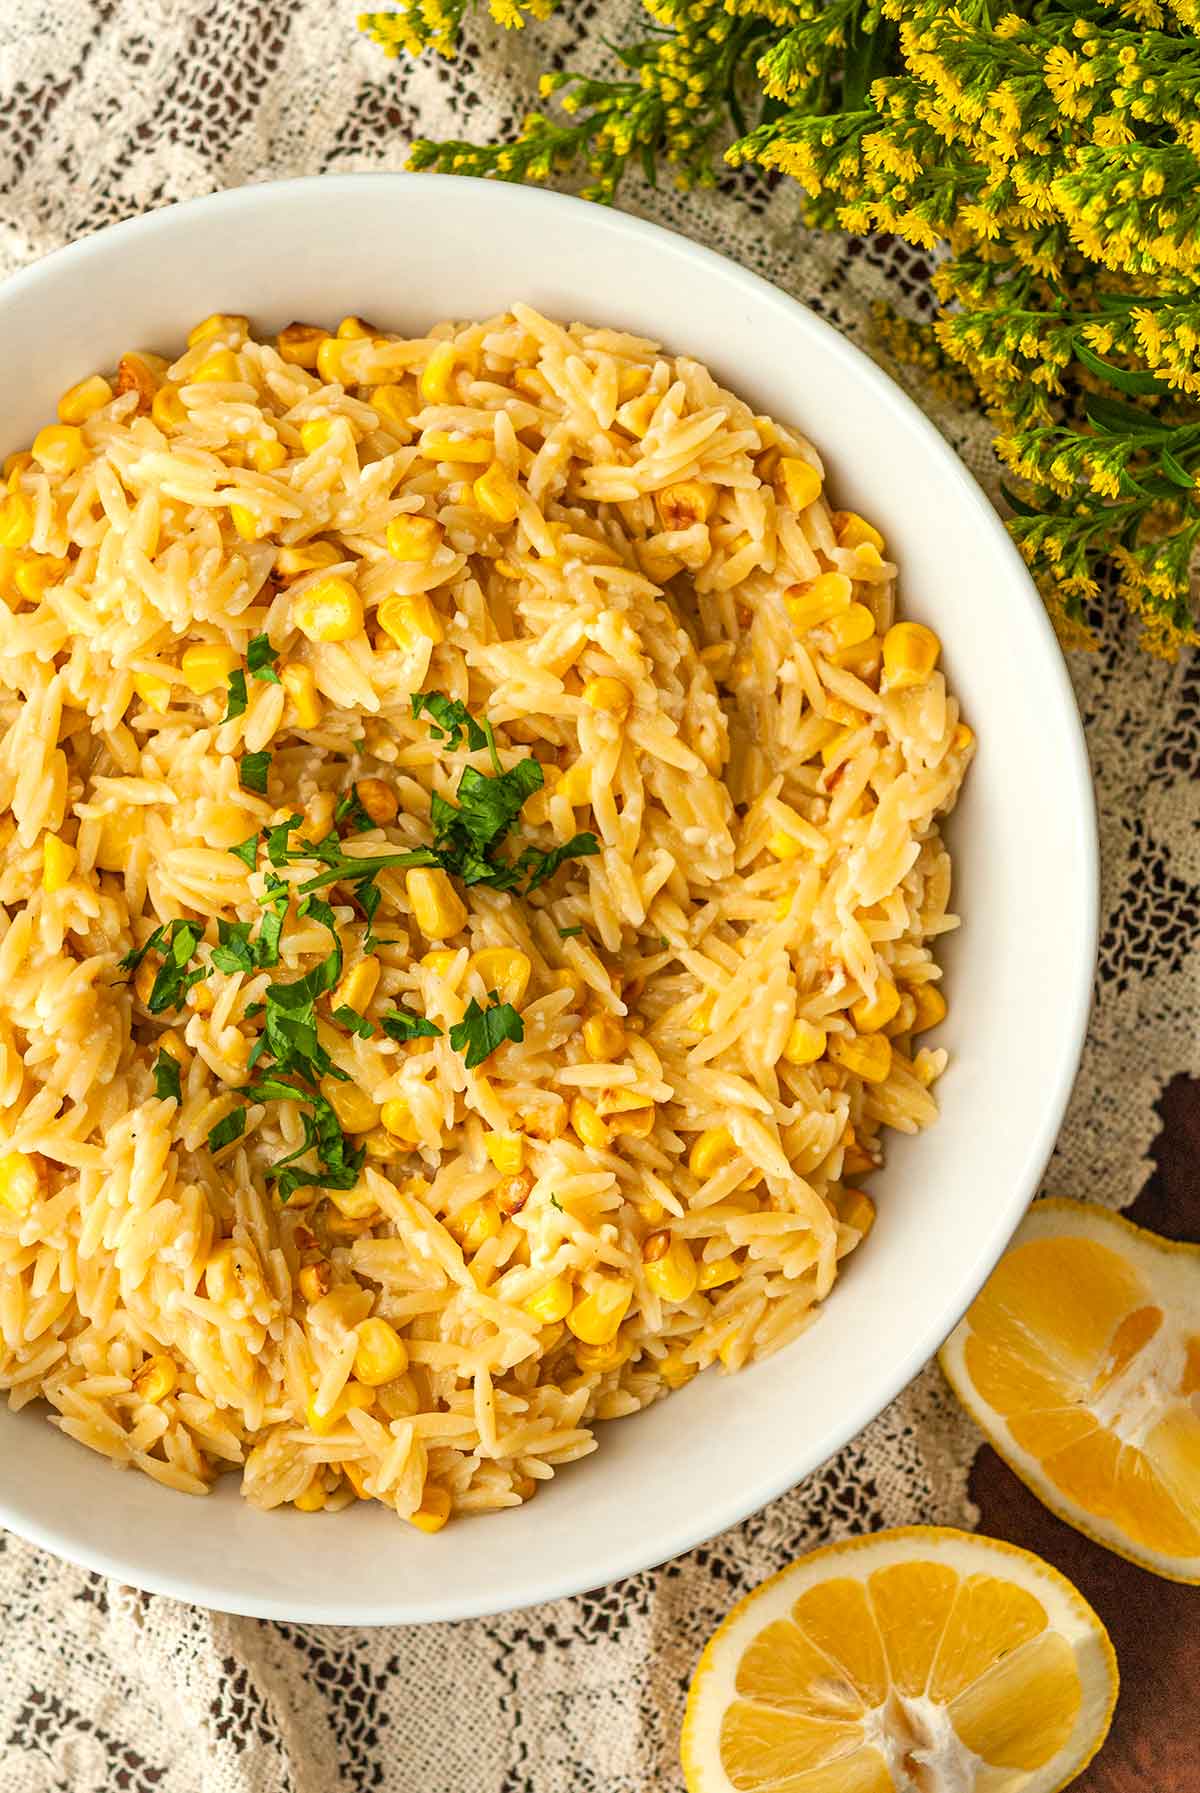 A bowl of lemon orzo on a lace table cloth surrounded by lemon slices and flowers.